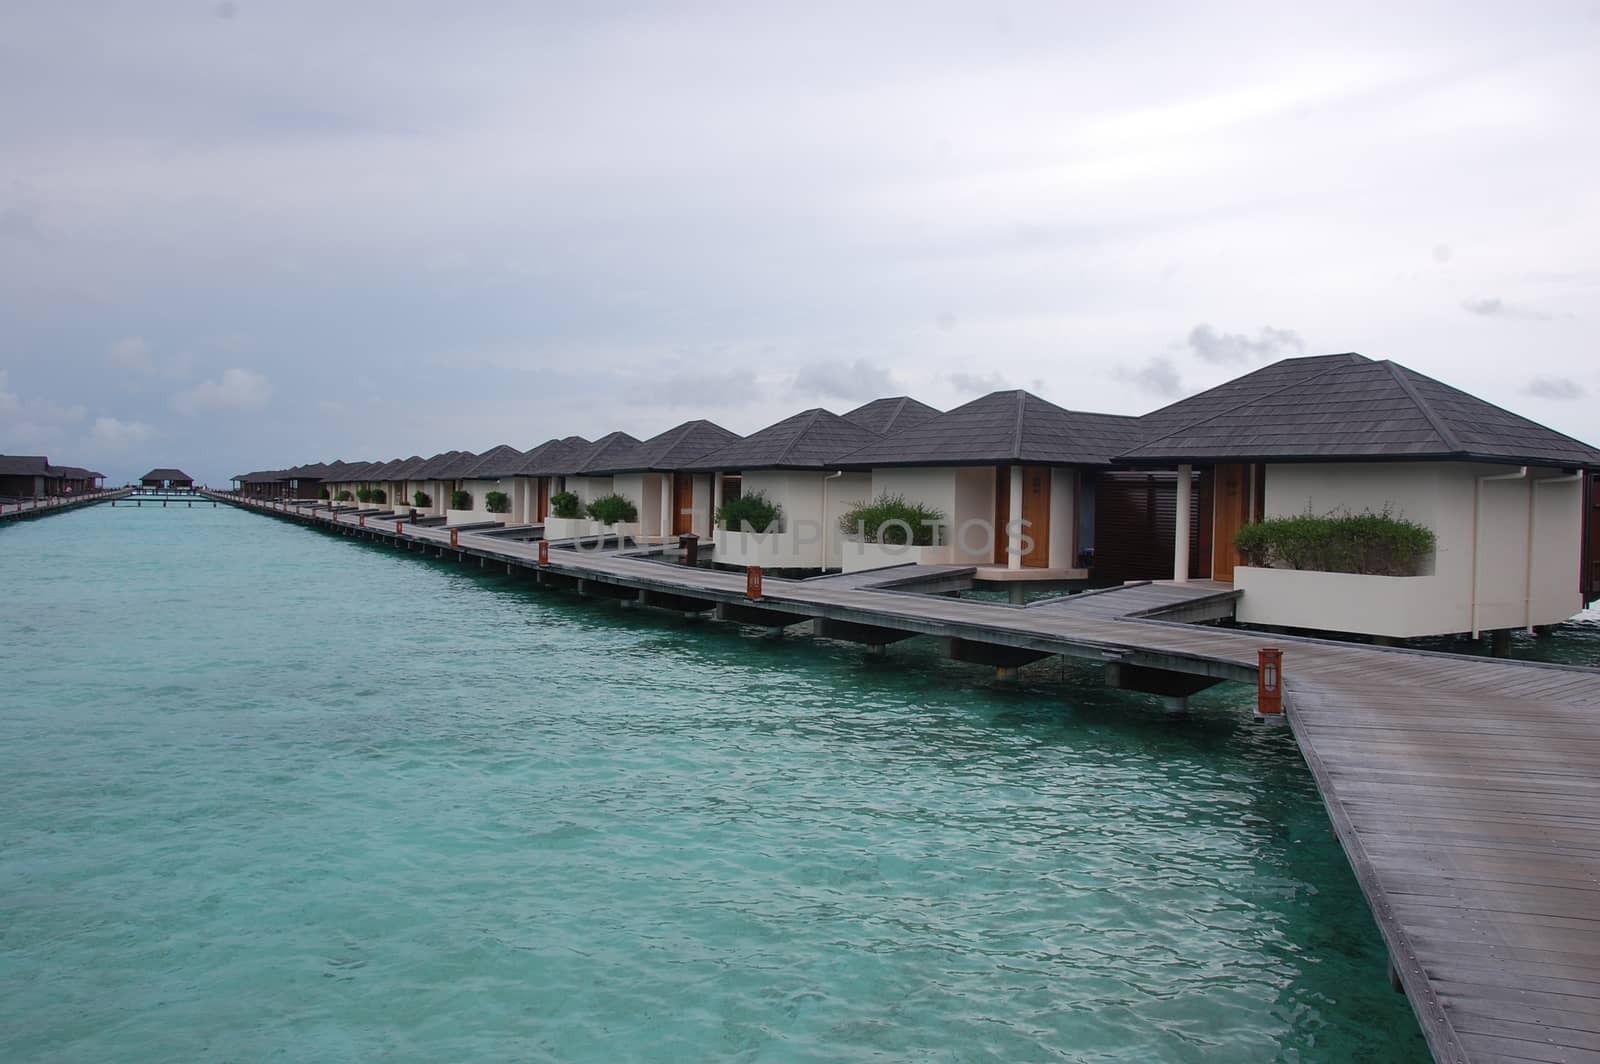 Timber pier with bungalow at island resort in Maldives